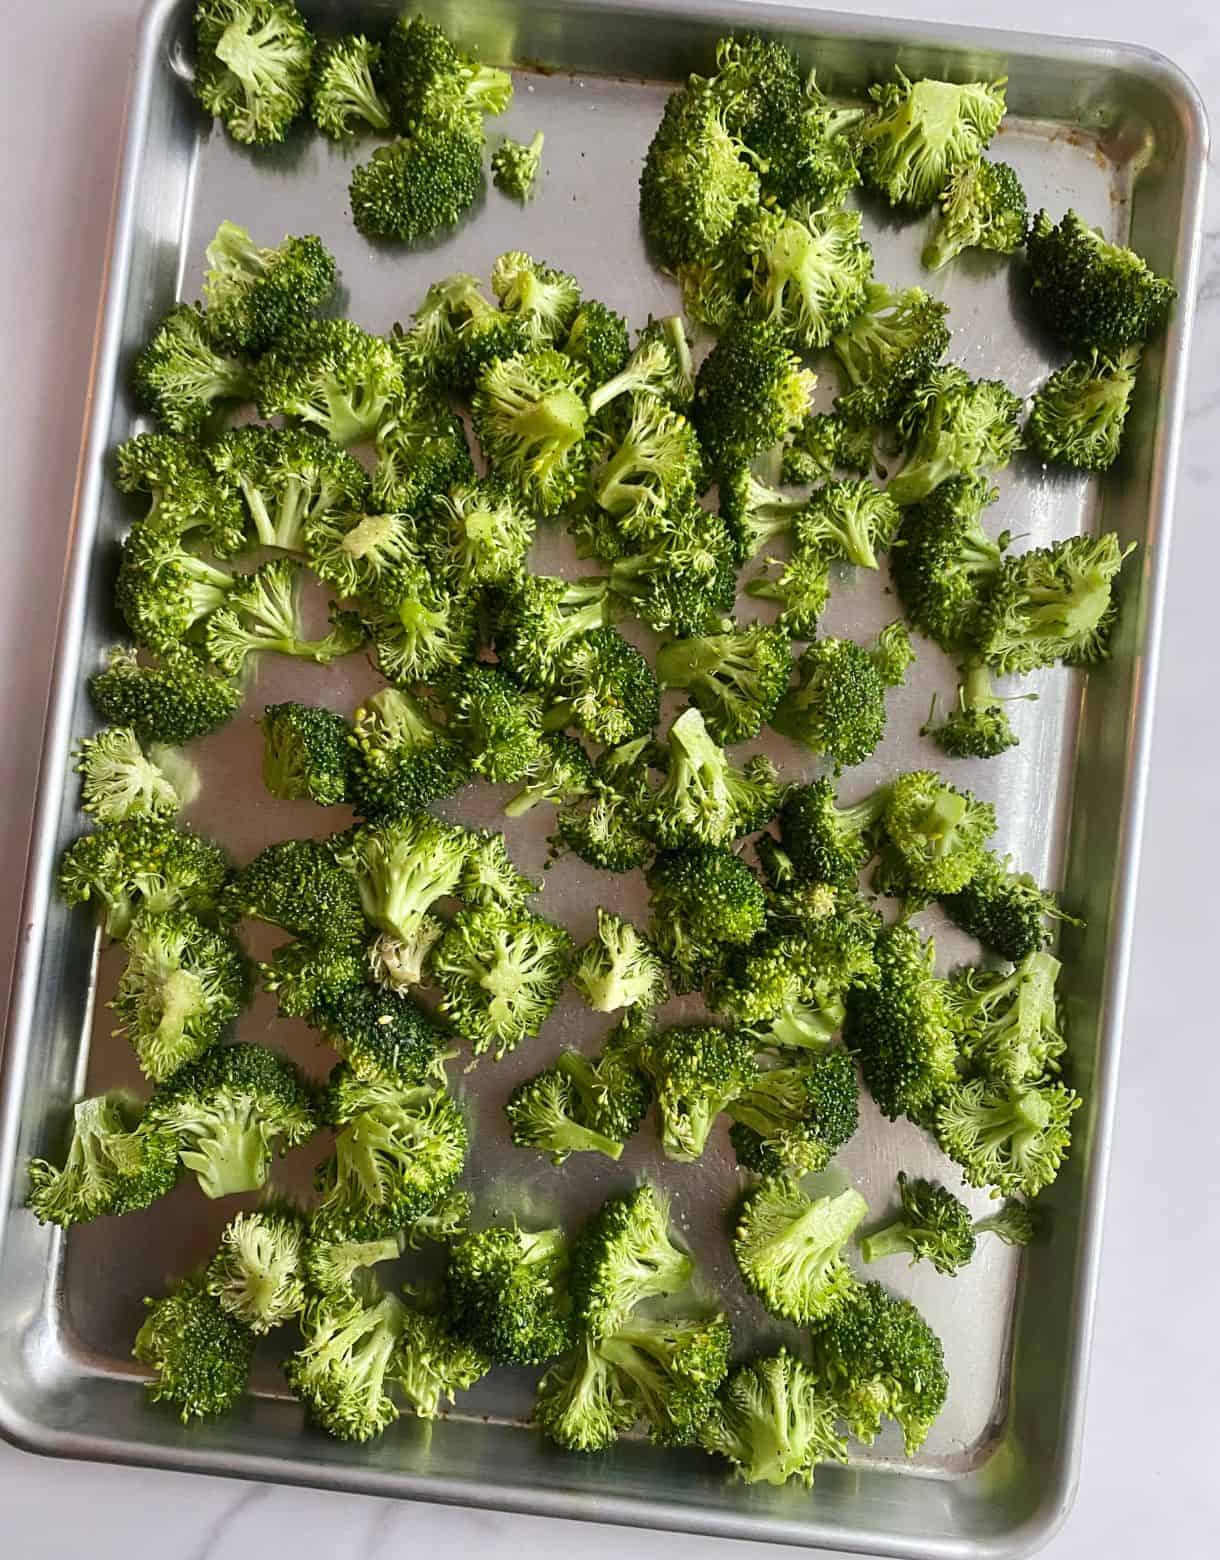 A sheet pan with raw broccoli ready to go in the oven for Sheet Pan Broccoli.